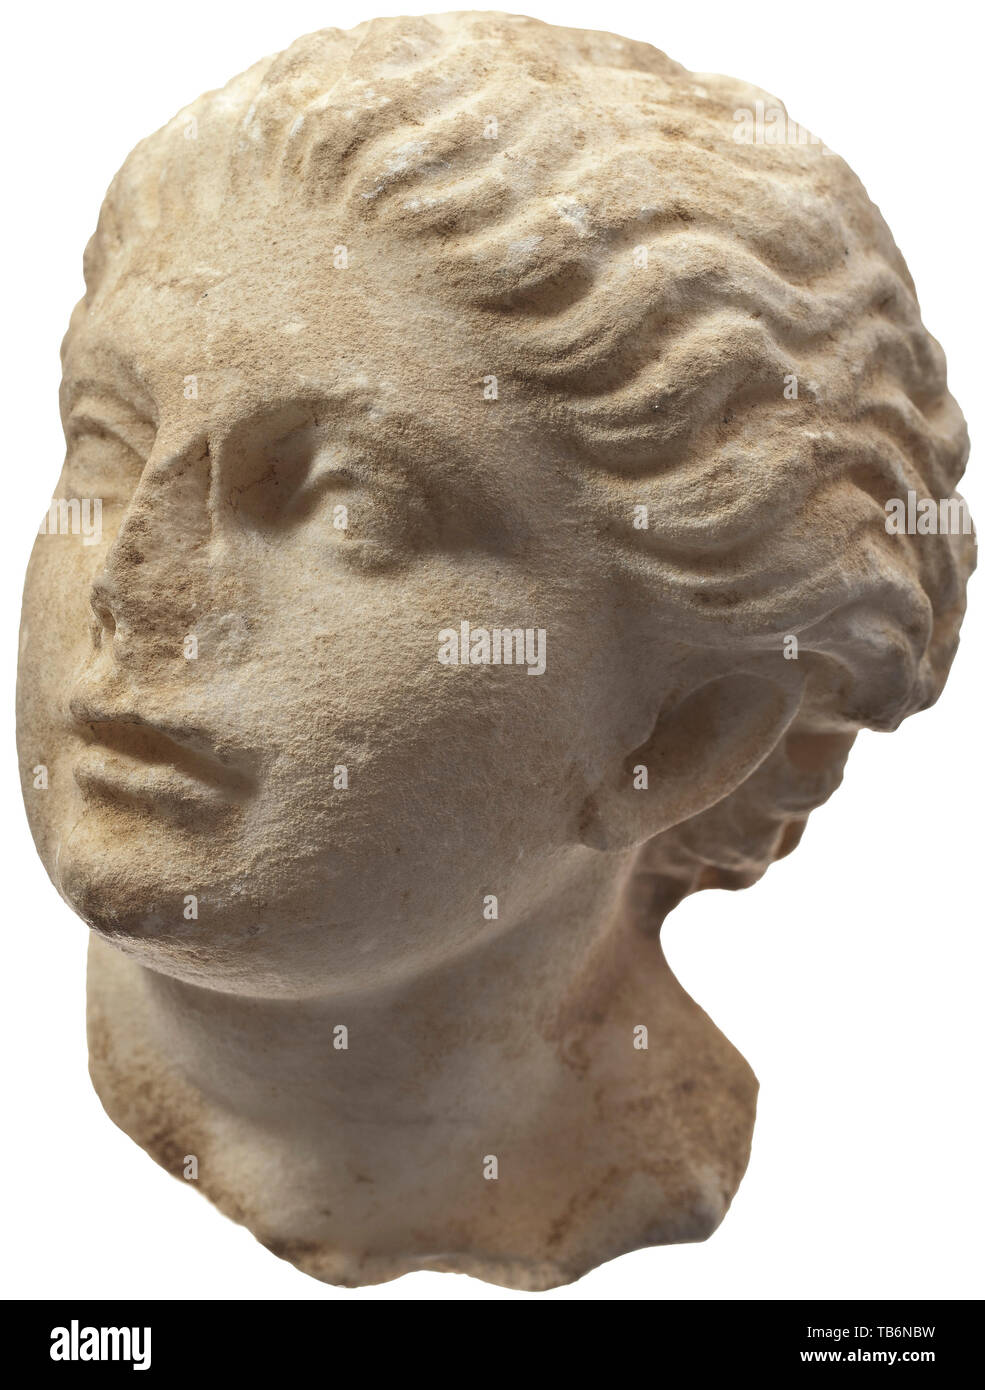 A maiden's head (nymph), sculpture from the 19th century based on a Hellenistic model, The finely crafted head of a young girl, modelled on a sculpture from the 2nd century BC. The position of the head, turned to the left, and details of the hairstyle suggest that the sculpture was inspired by the nymph in the group entitled 'Invitation to the Dance'. The right side of nose broken off, the surface slightly rough. Minimal knocks. A charming little stone sculpture. Height 15 cm. Provenance: Polish private collection, acquired by the consignor's fat, Additional-Rights-Clearance-Info-Not-Available Stock Photo